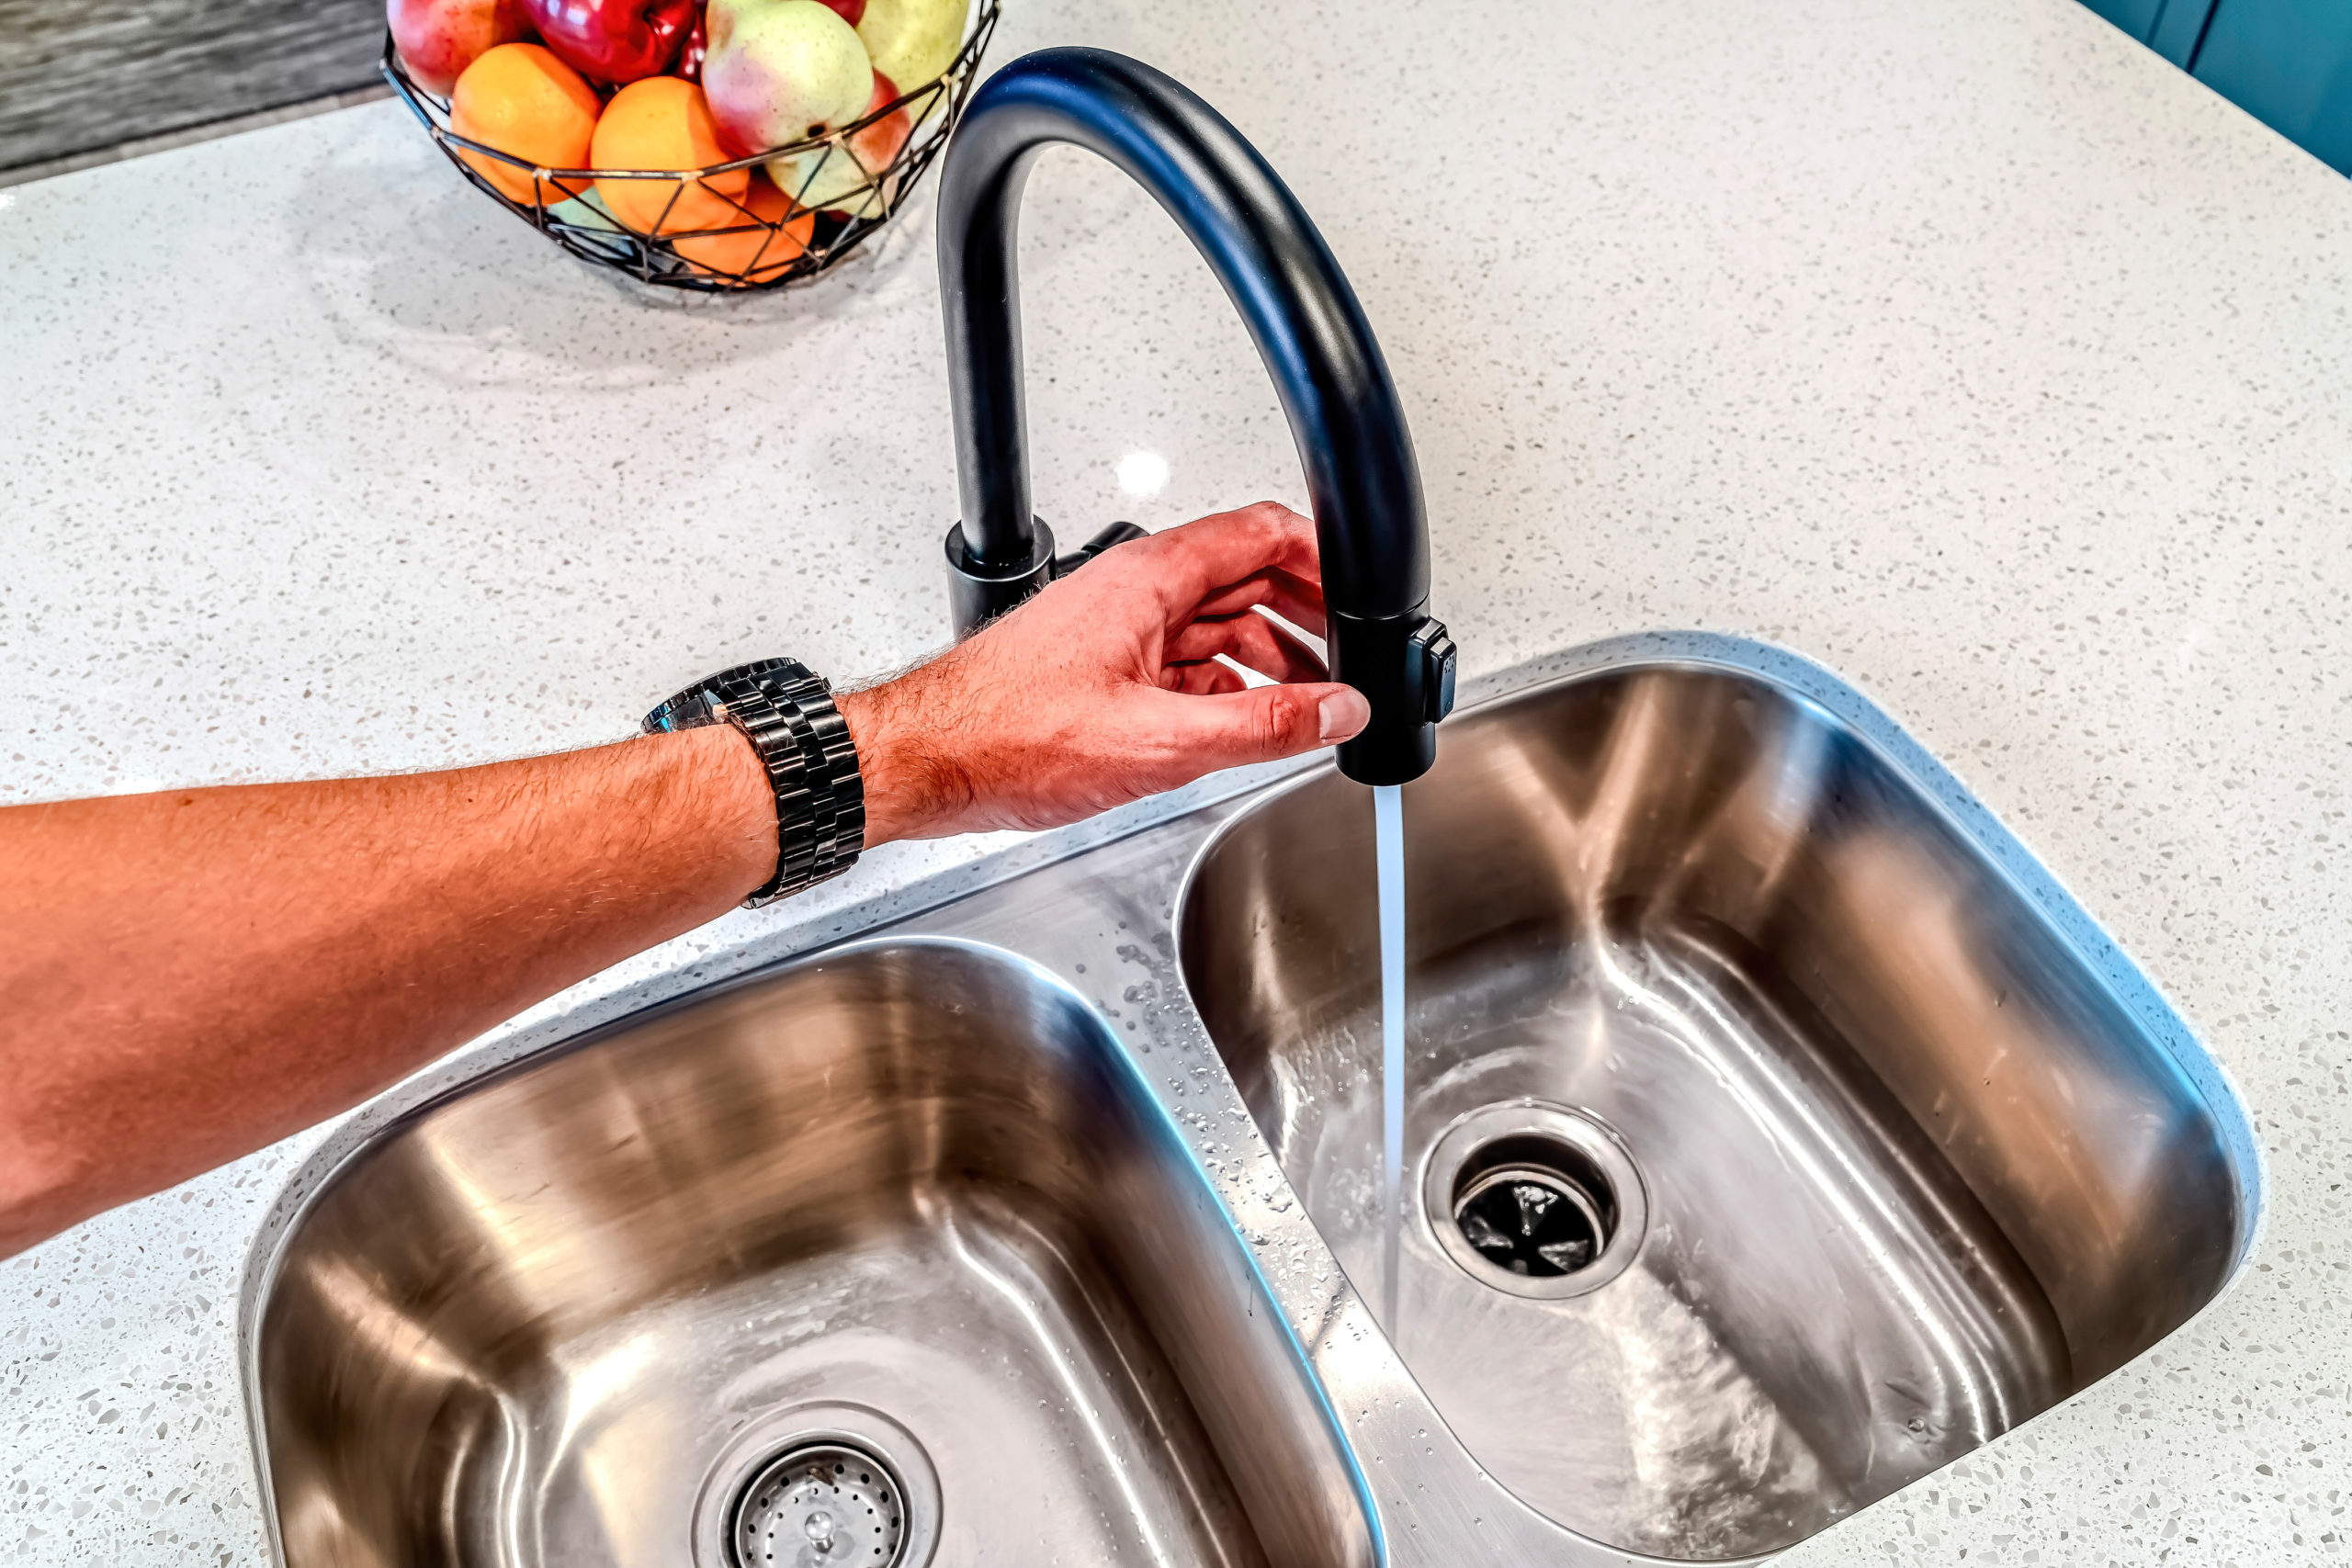 Sifting Through Sink Options: What Is Right for Your Kitchen?